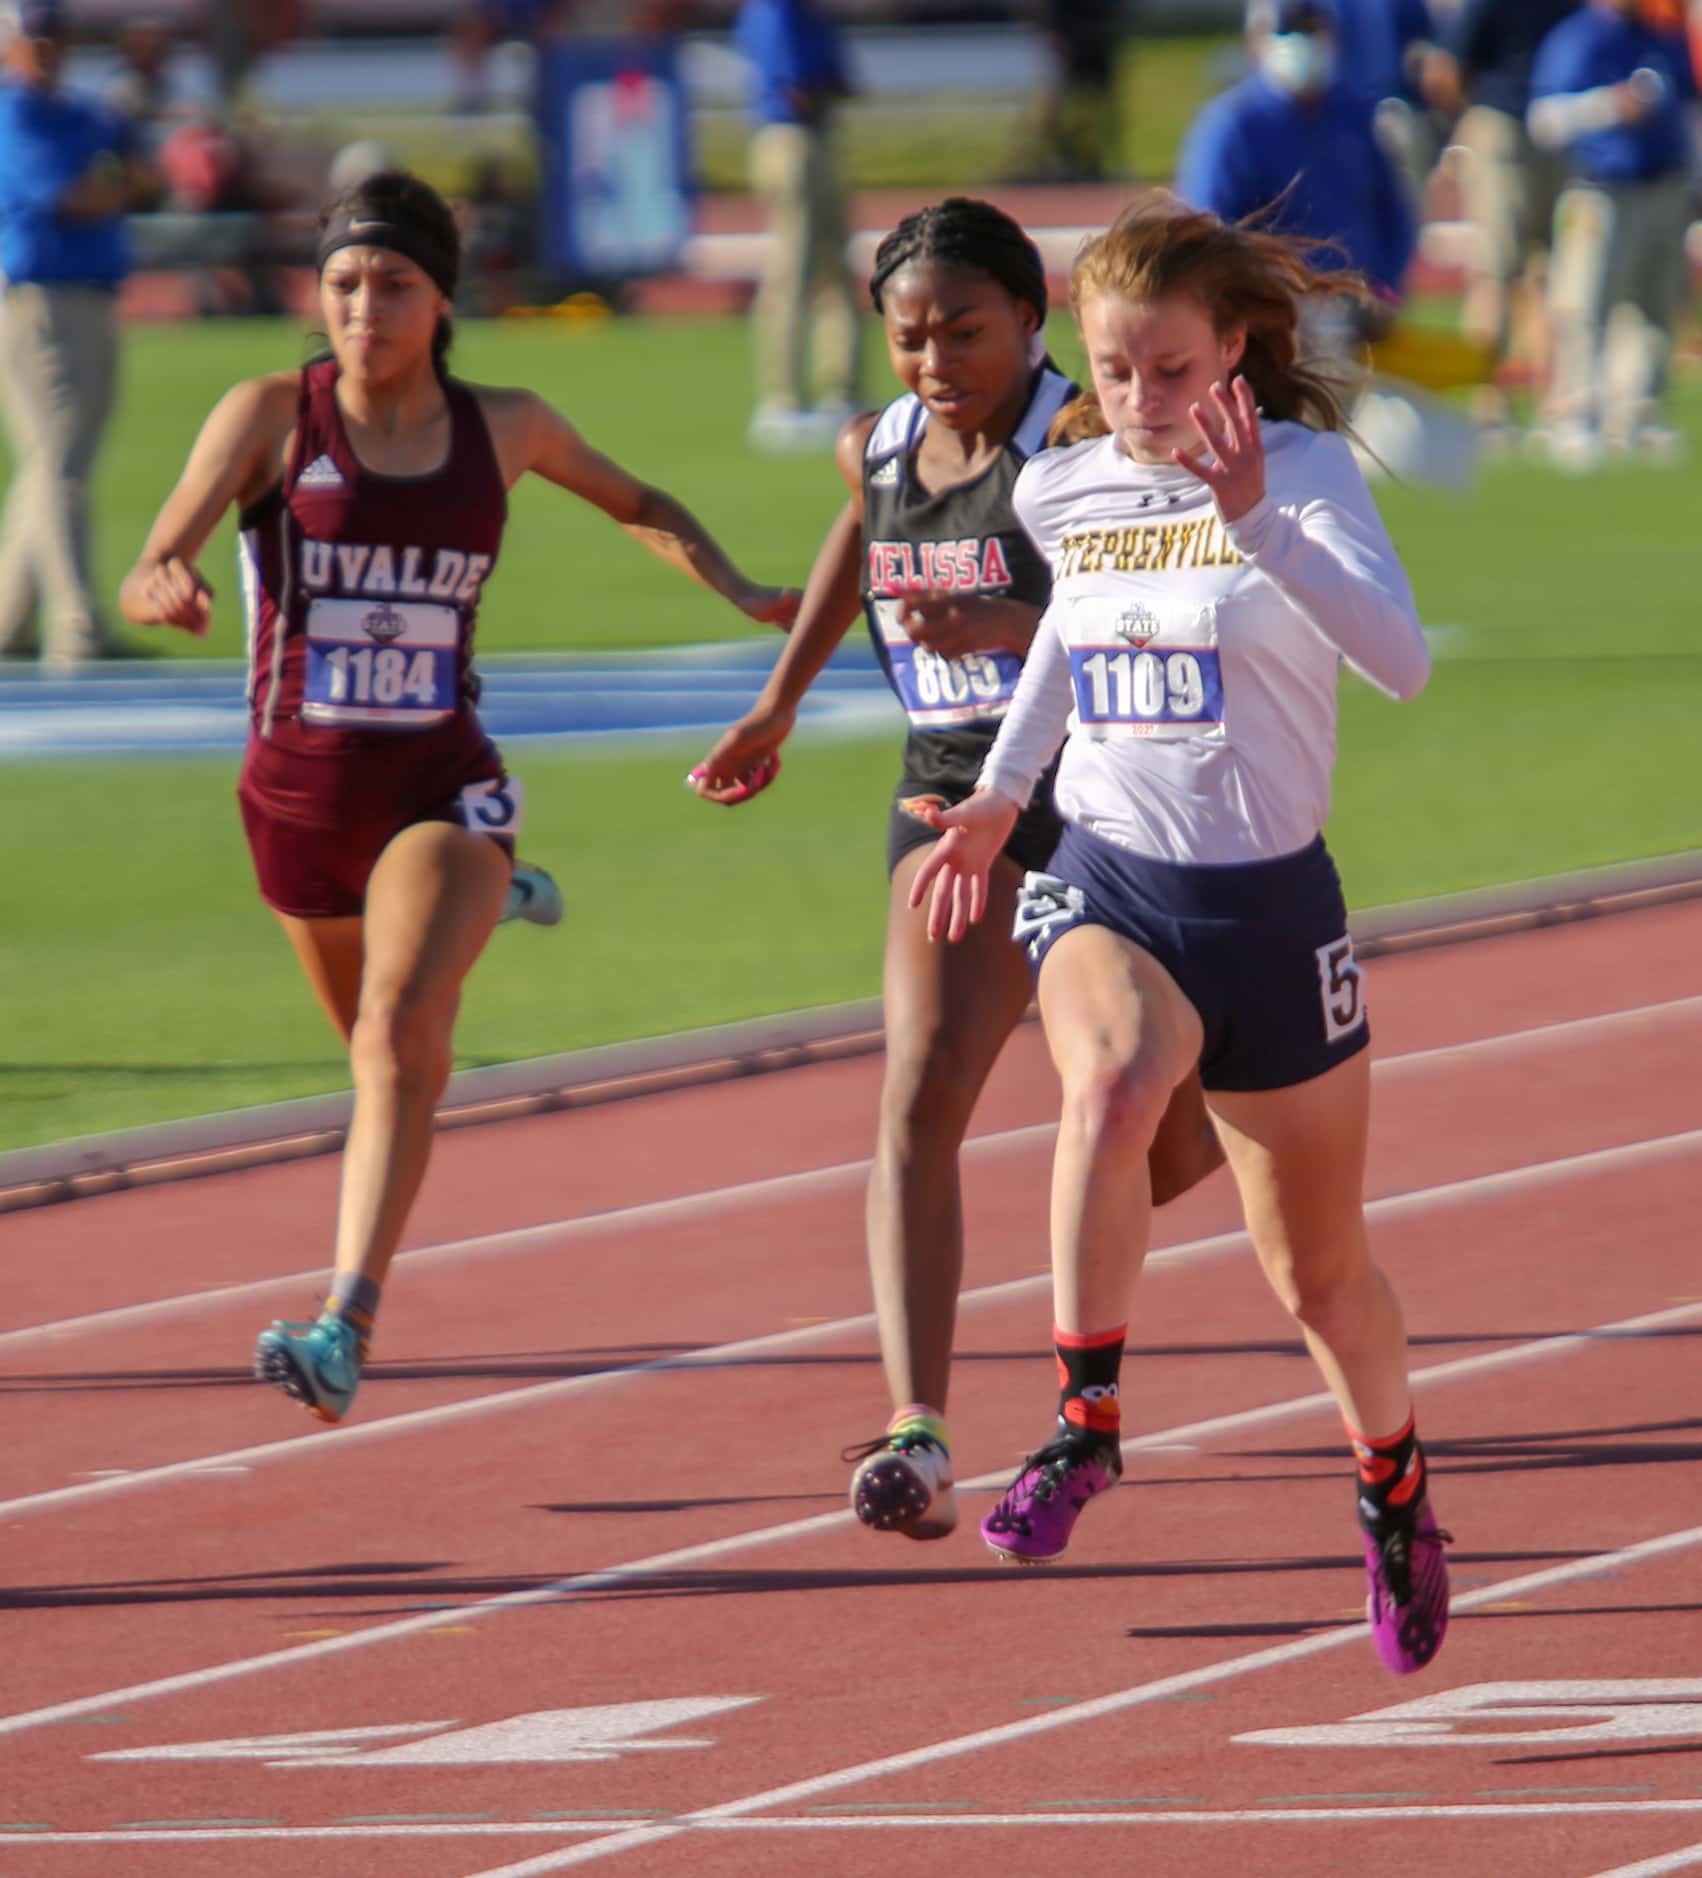 Melissa's Kaylee Lewis places second after Stephenville's Victoria Cameron at] 4A girls 100...